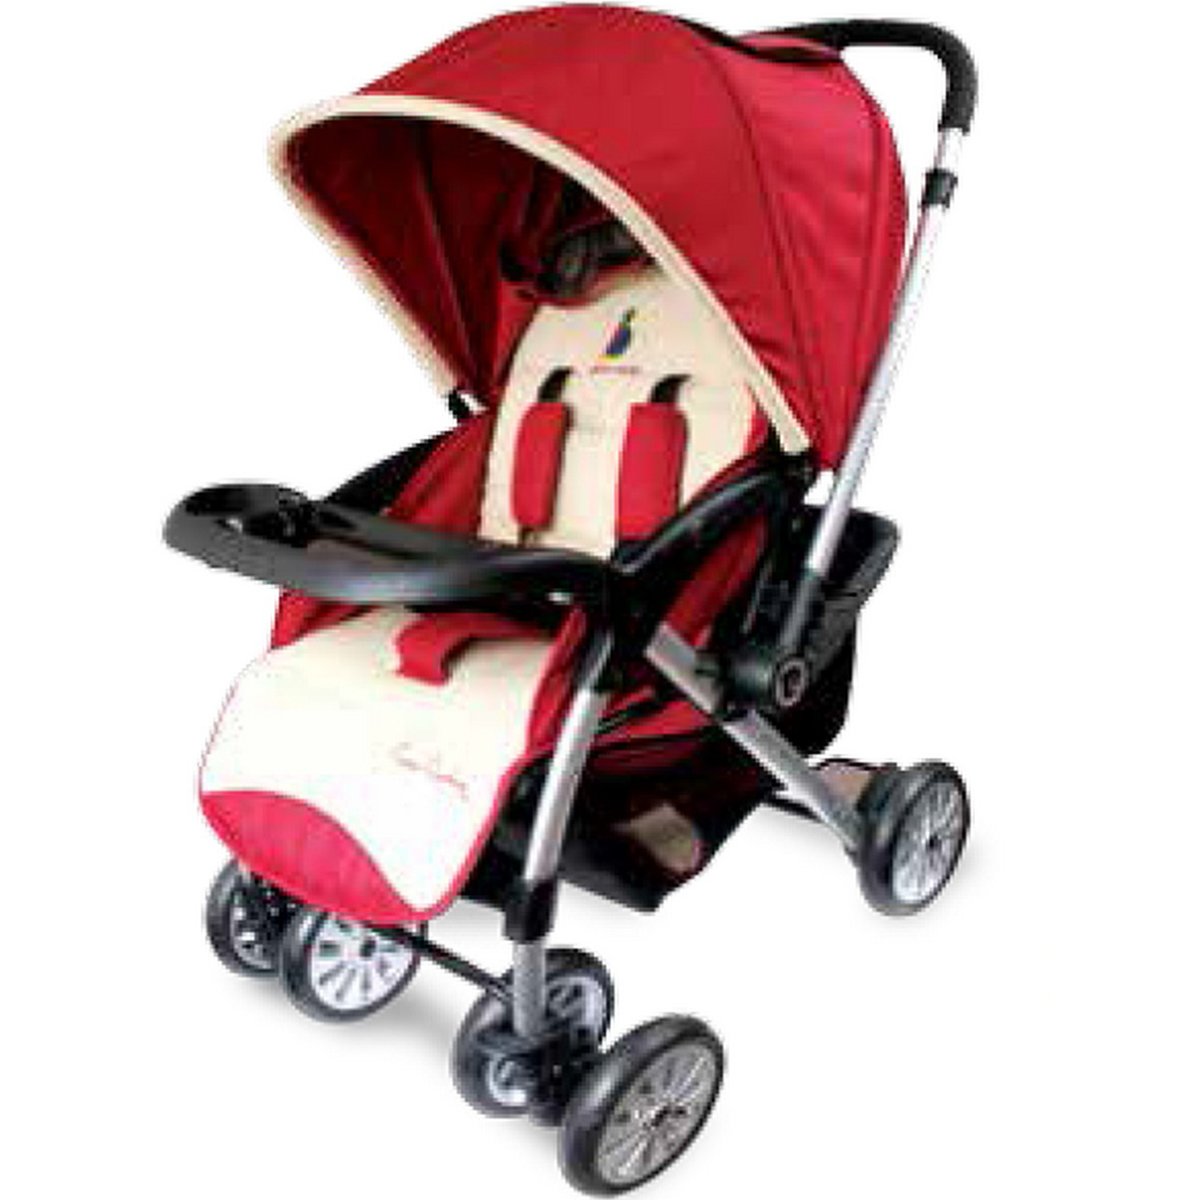 Pierre Cardin Baby Stroller PS923B Assorted Color